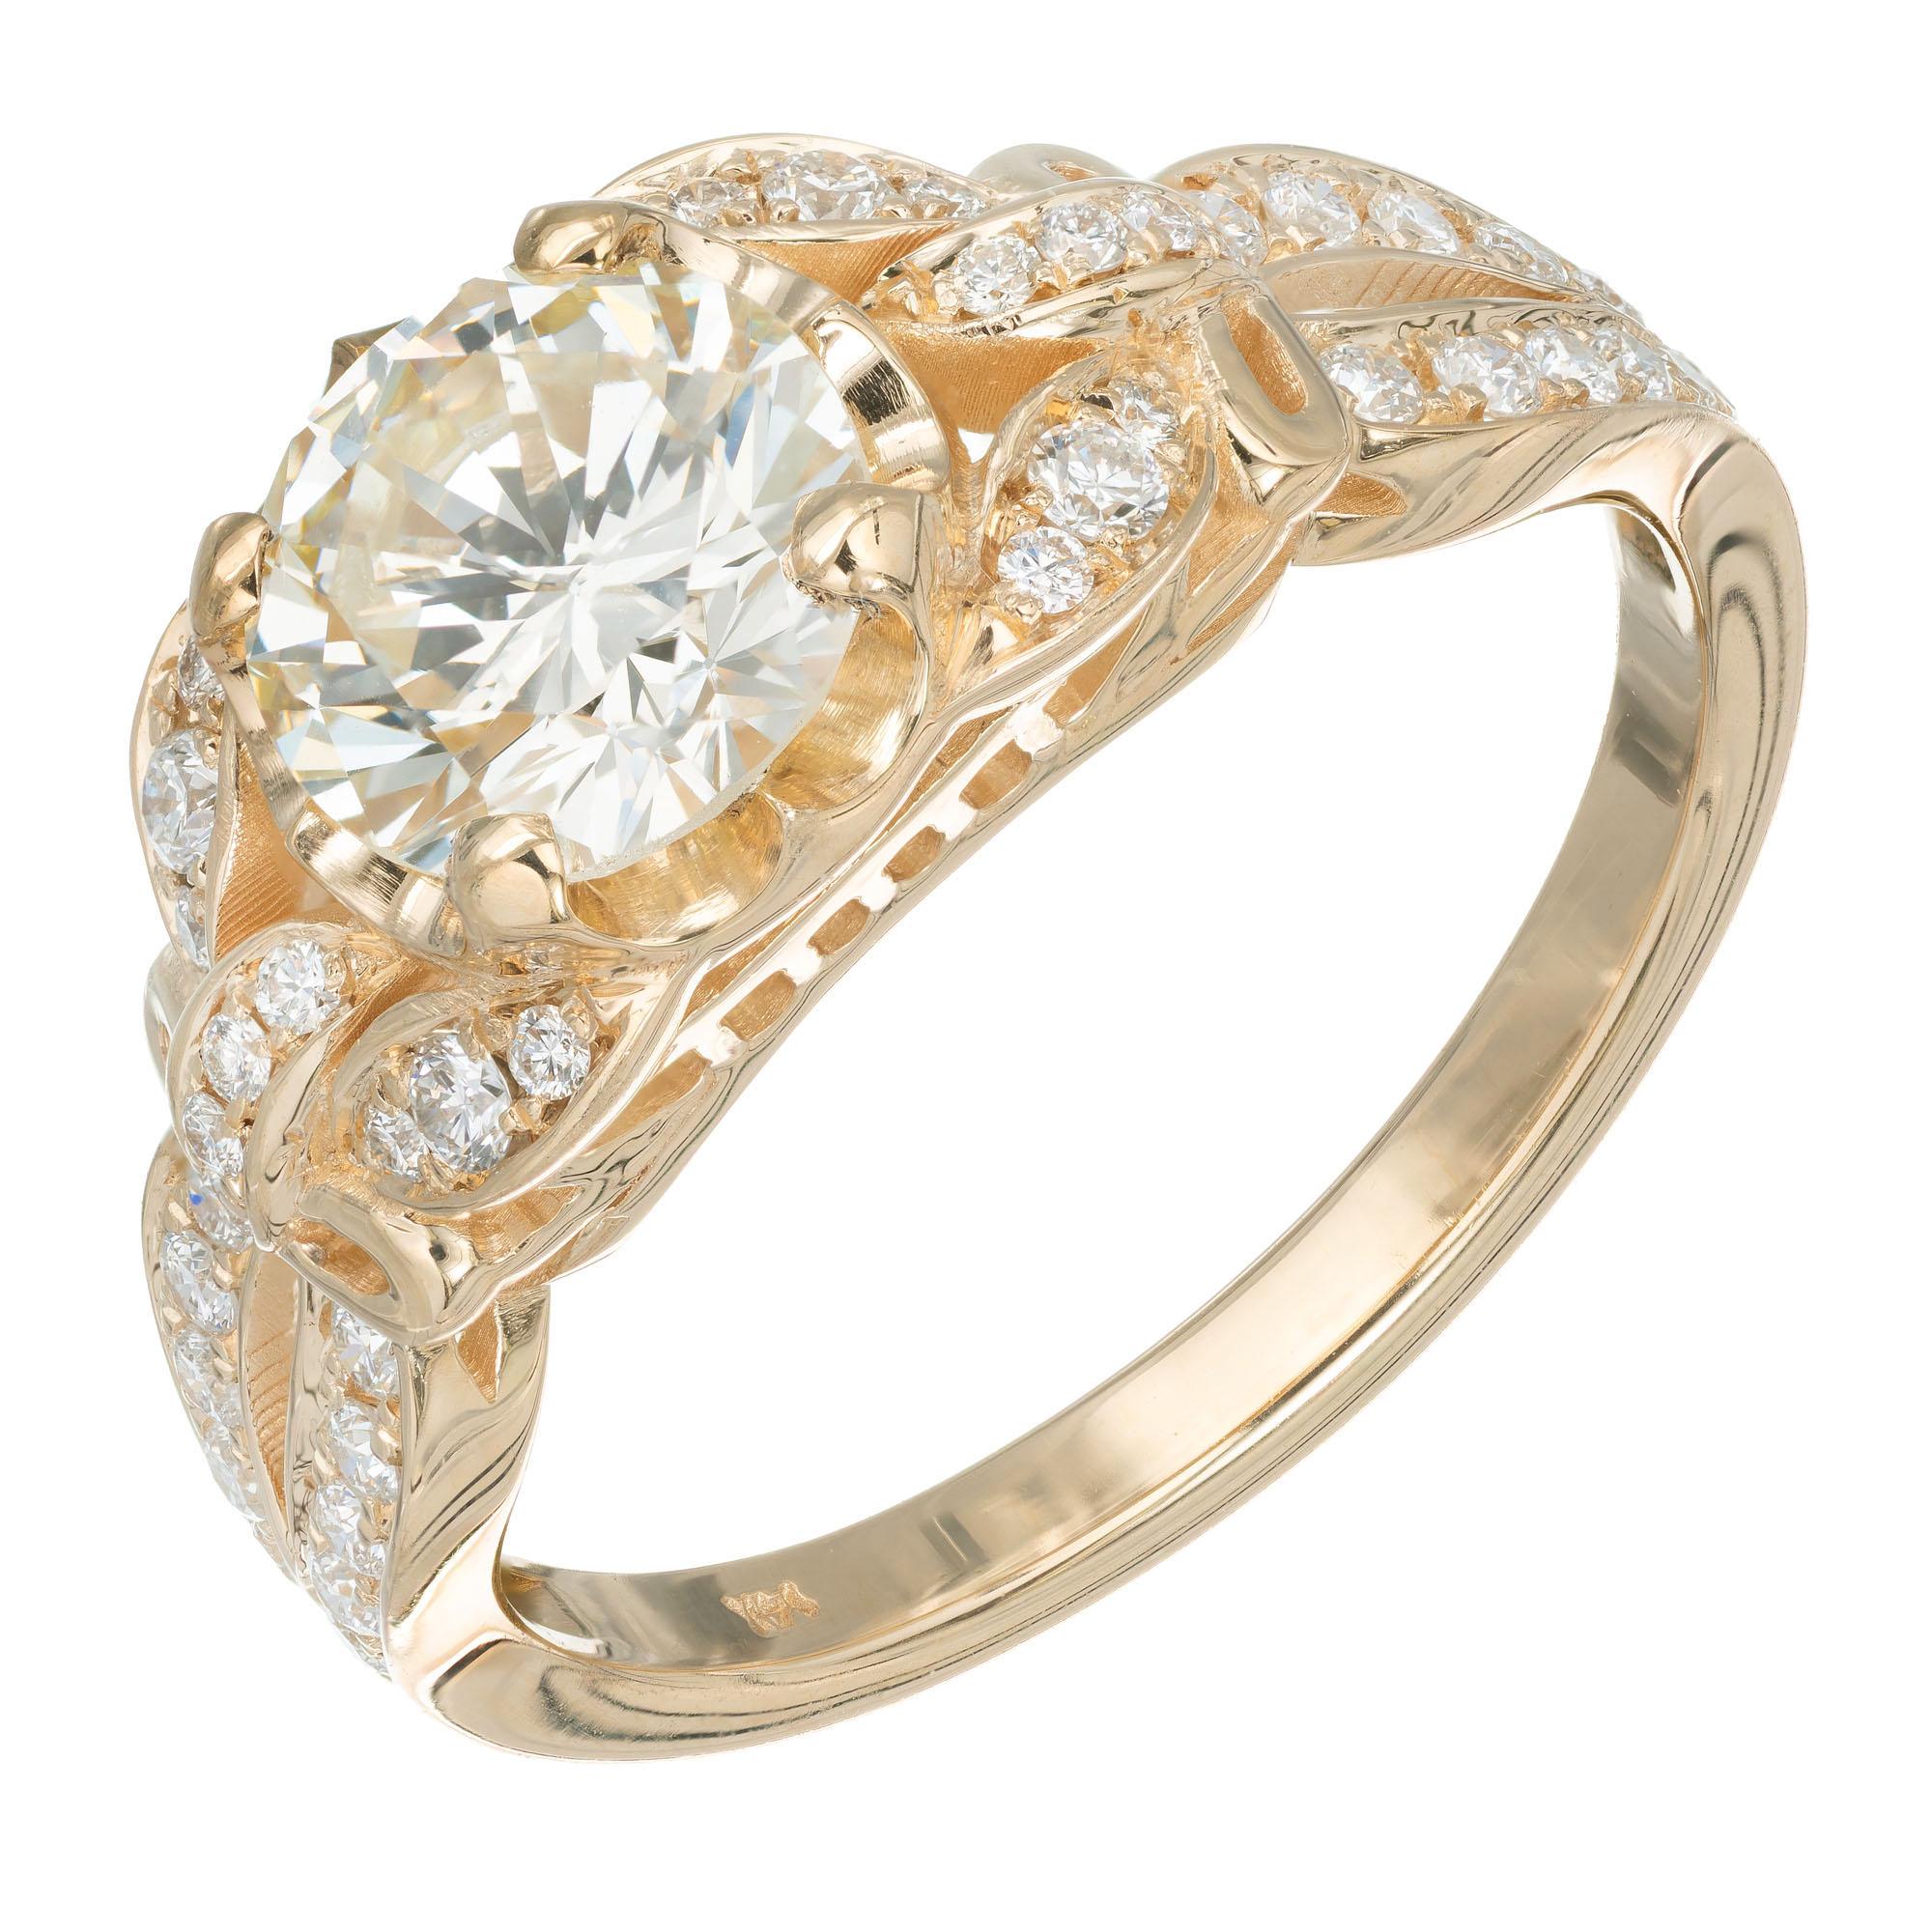 Peter Suchy Antique inspired diamond engagement ring. GIA certified round center stone with butterfly design sides and pave diamonds set in a 14k yellow gold setting.  

1 round brilliant cut diamond M SI, approx.  1.21ct GIA Certificate #